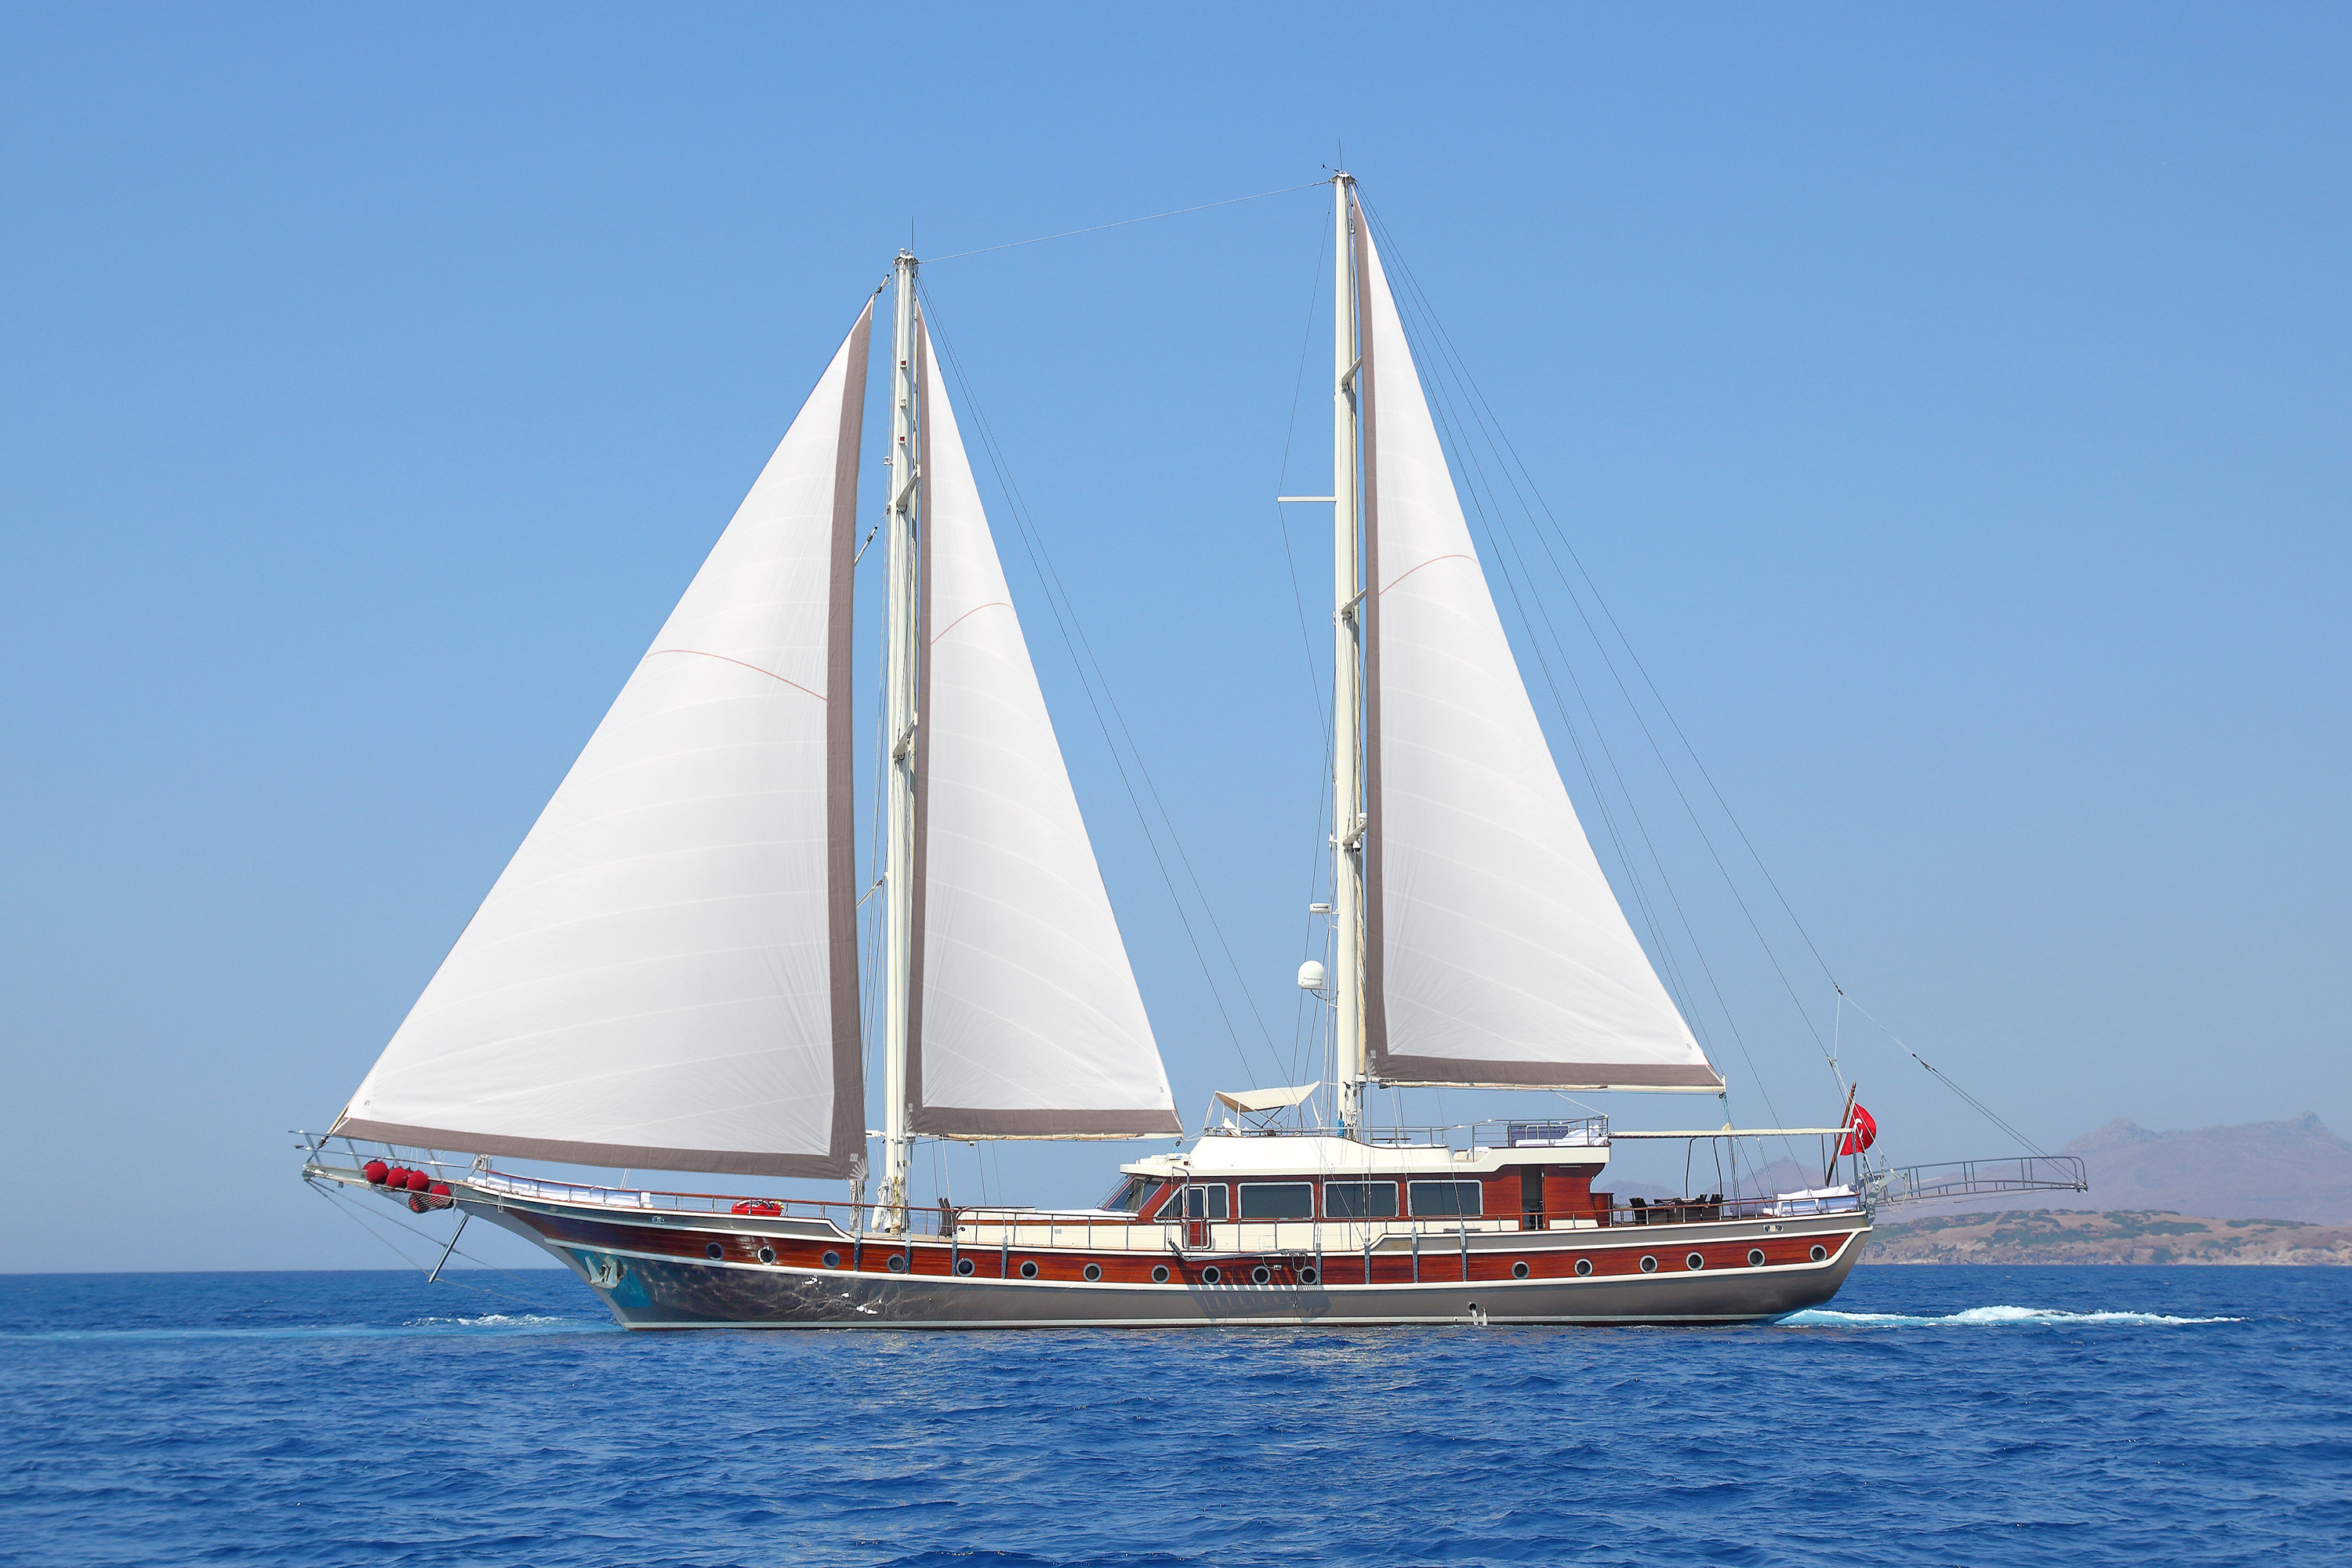 Double Eagle Yacht – April (Daily)